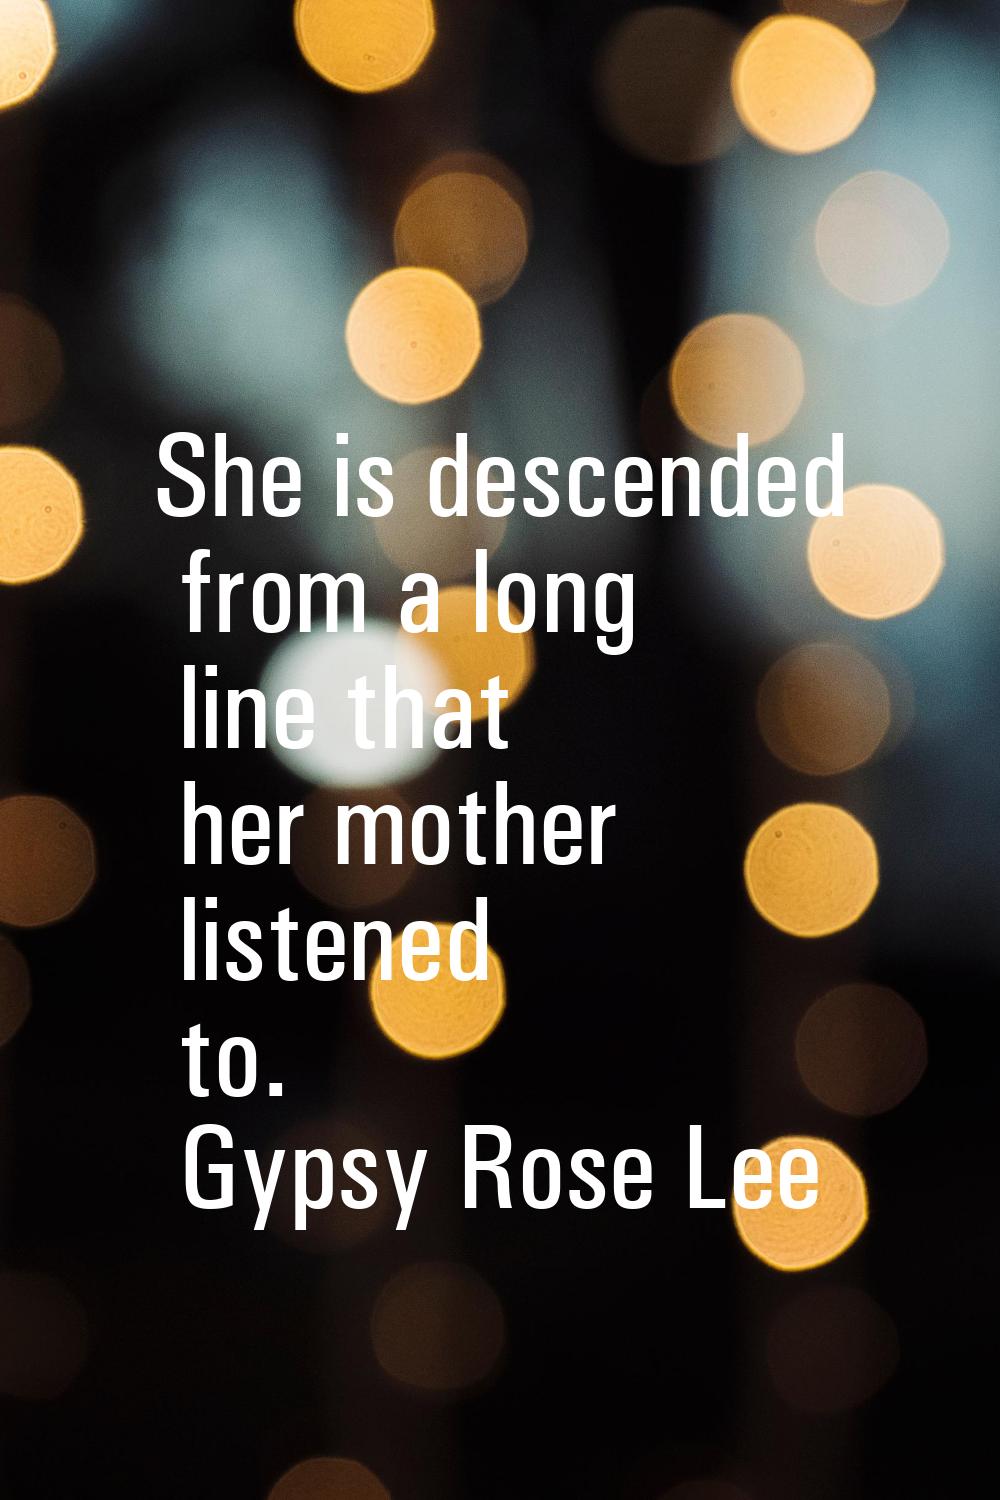 She is descended from a long line that her mother listened to.